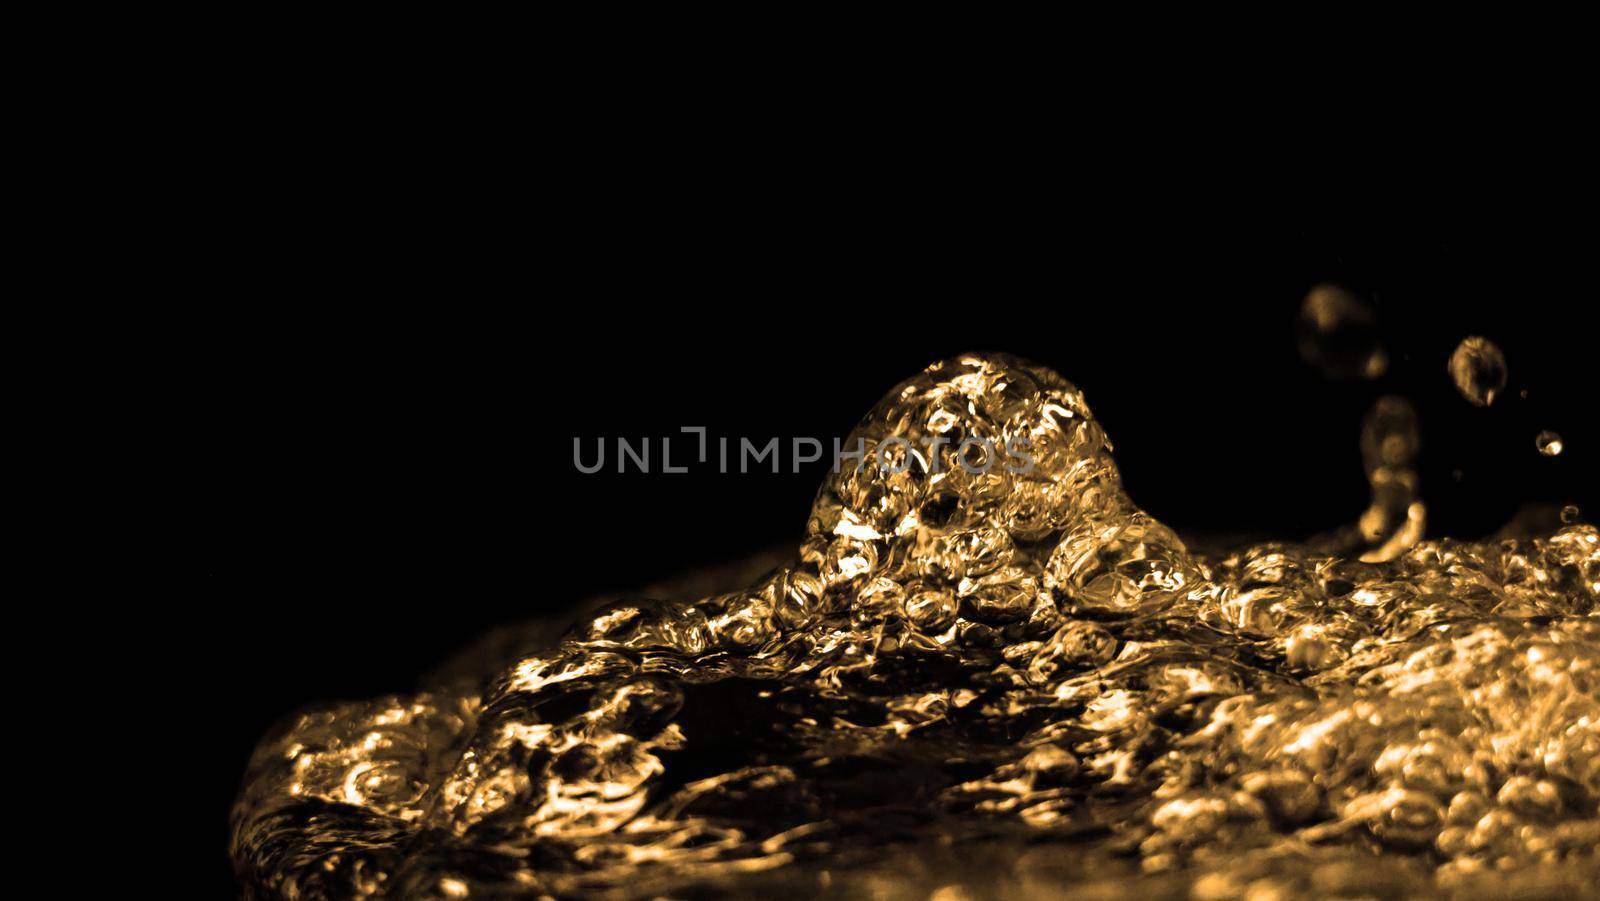 Hi speed close up images of oil liquid from diesel gasoline splashing and moving up to the air on black background for represent power of fuel liquid that active and powerful. studio shot premium gold color tone.